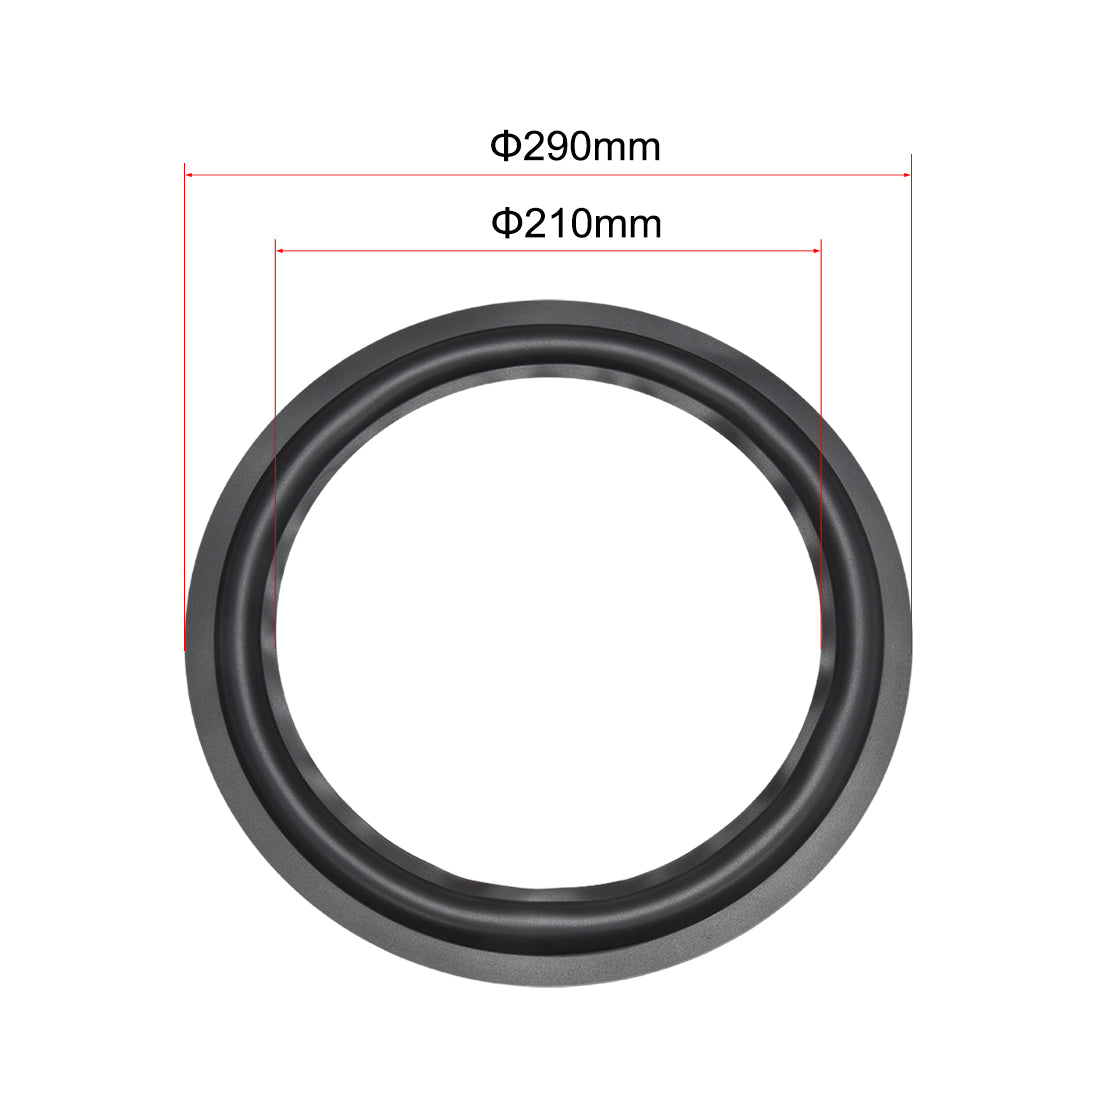 uxcell Uxcell 12" 12inch Speaker Rubber Edge Surround Rings Replacement Part for Speaker Repair or DIY 4pcs